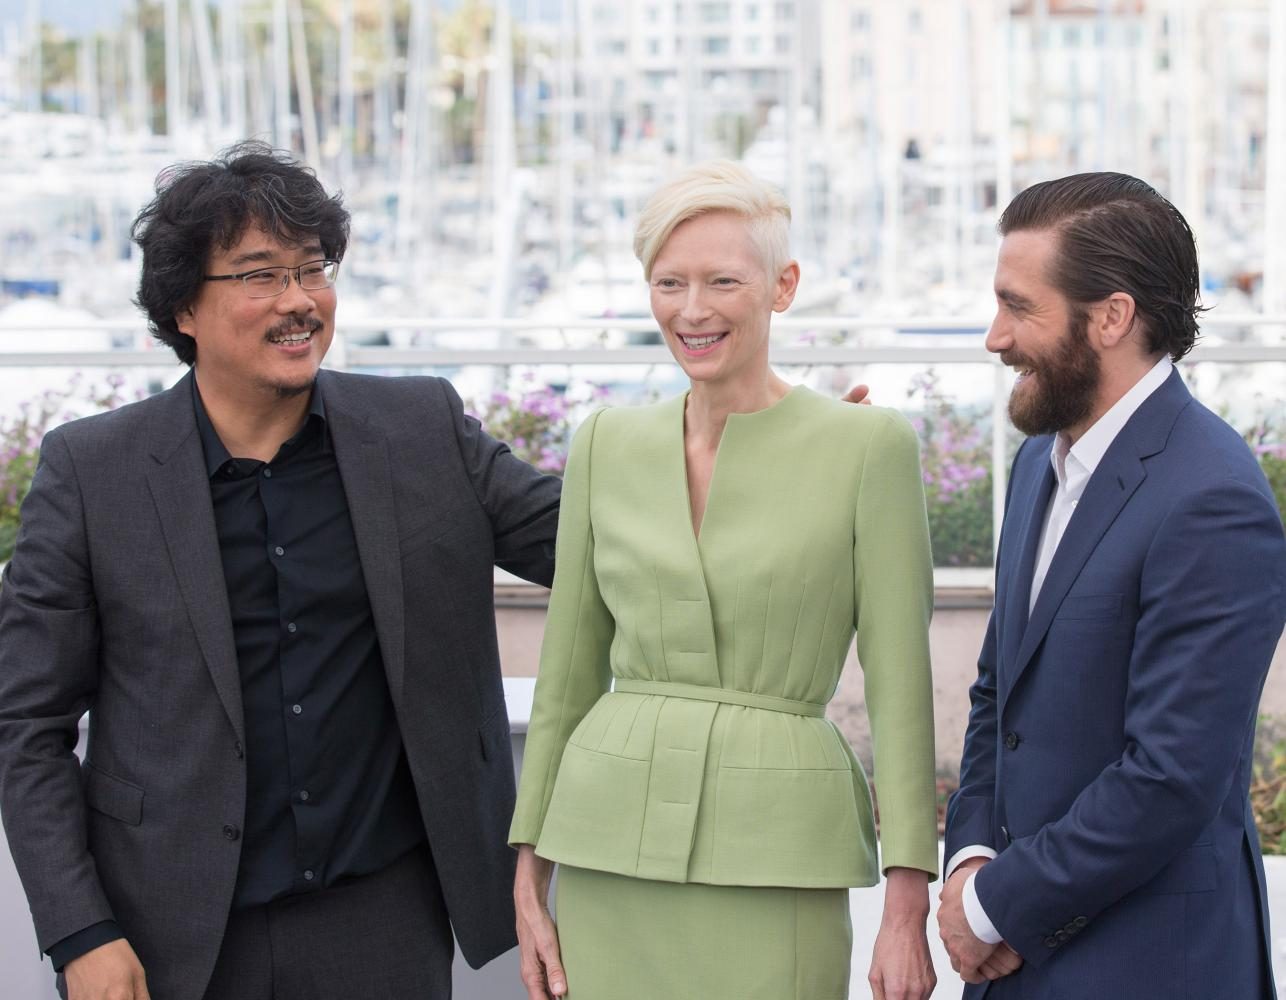 Pictured are director Bong Joon-Ho (left), actress Tilda Swinton (center) and actor Jake Gyllenhaal (right) from the film Okja. The film has an 86 percent fresh rating on Rotten Tomatoes.